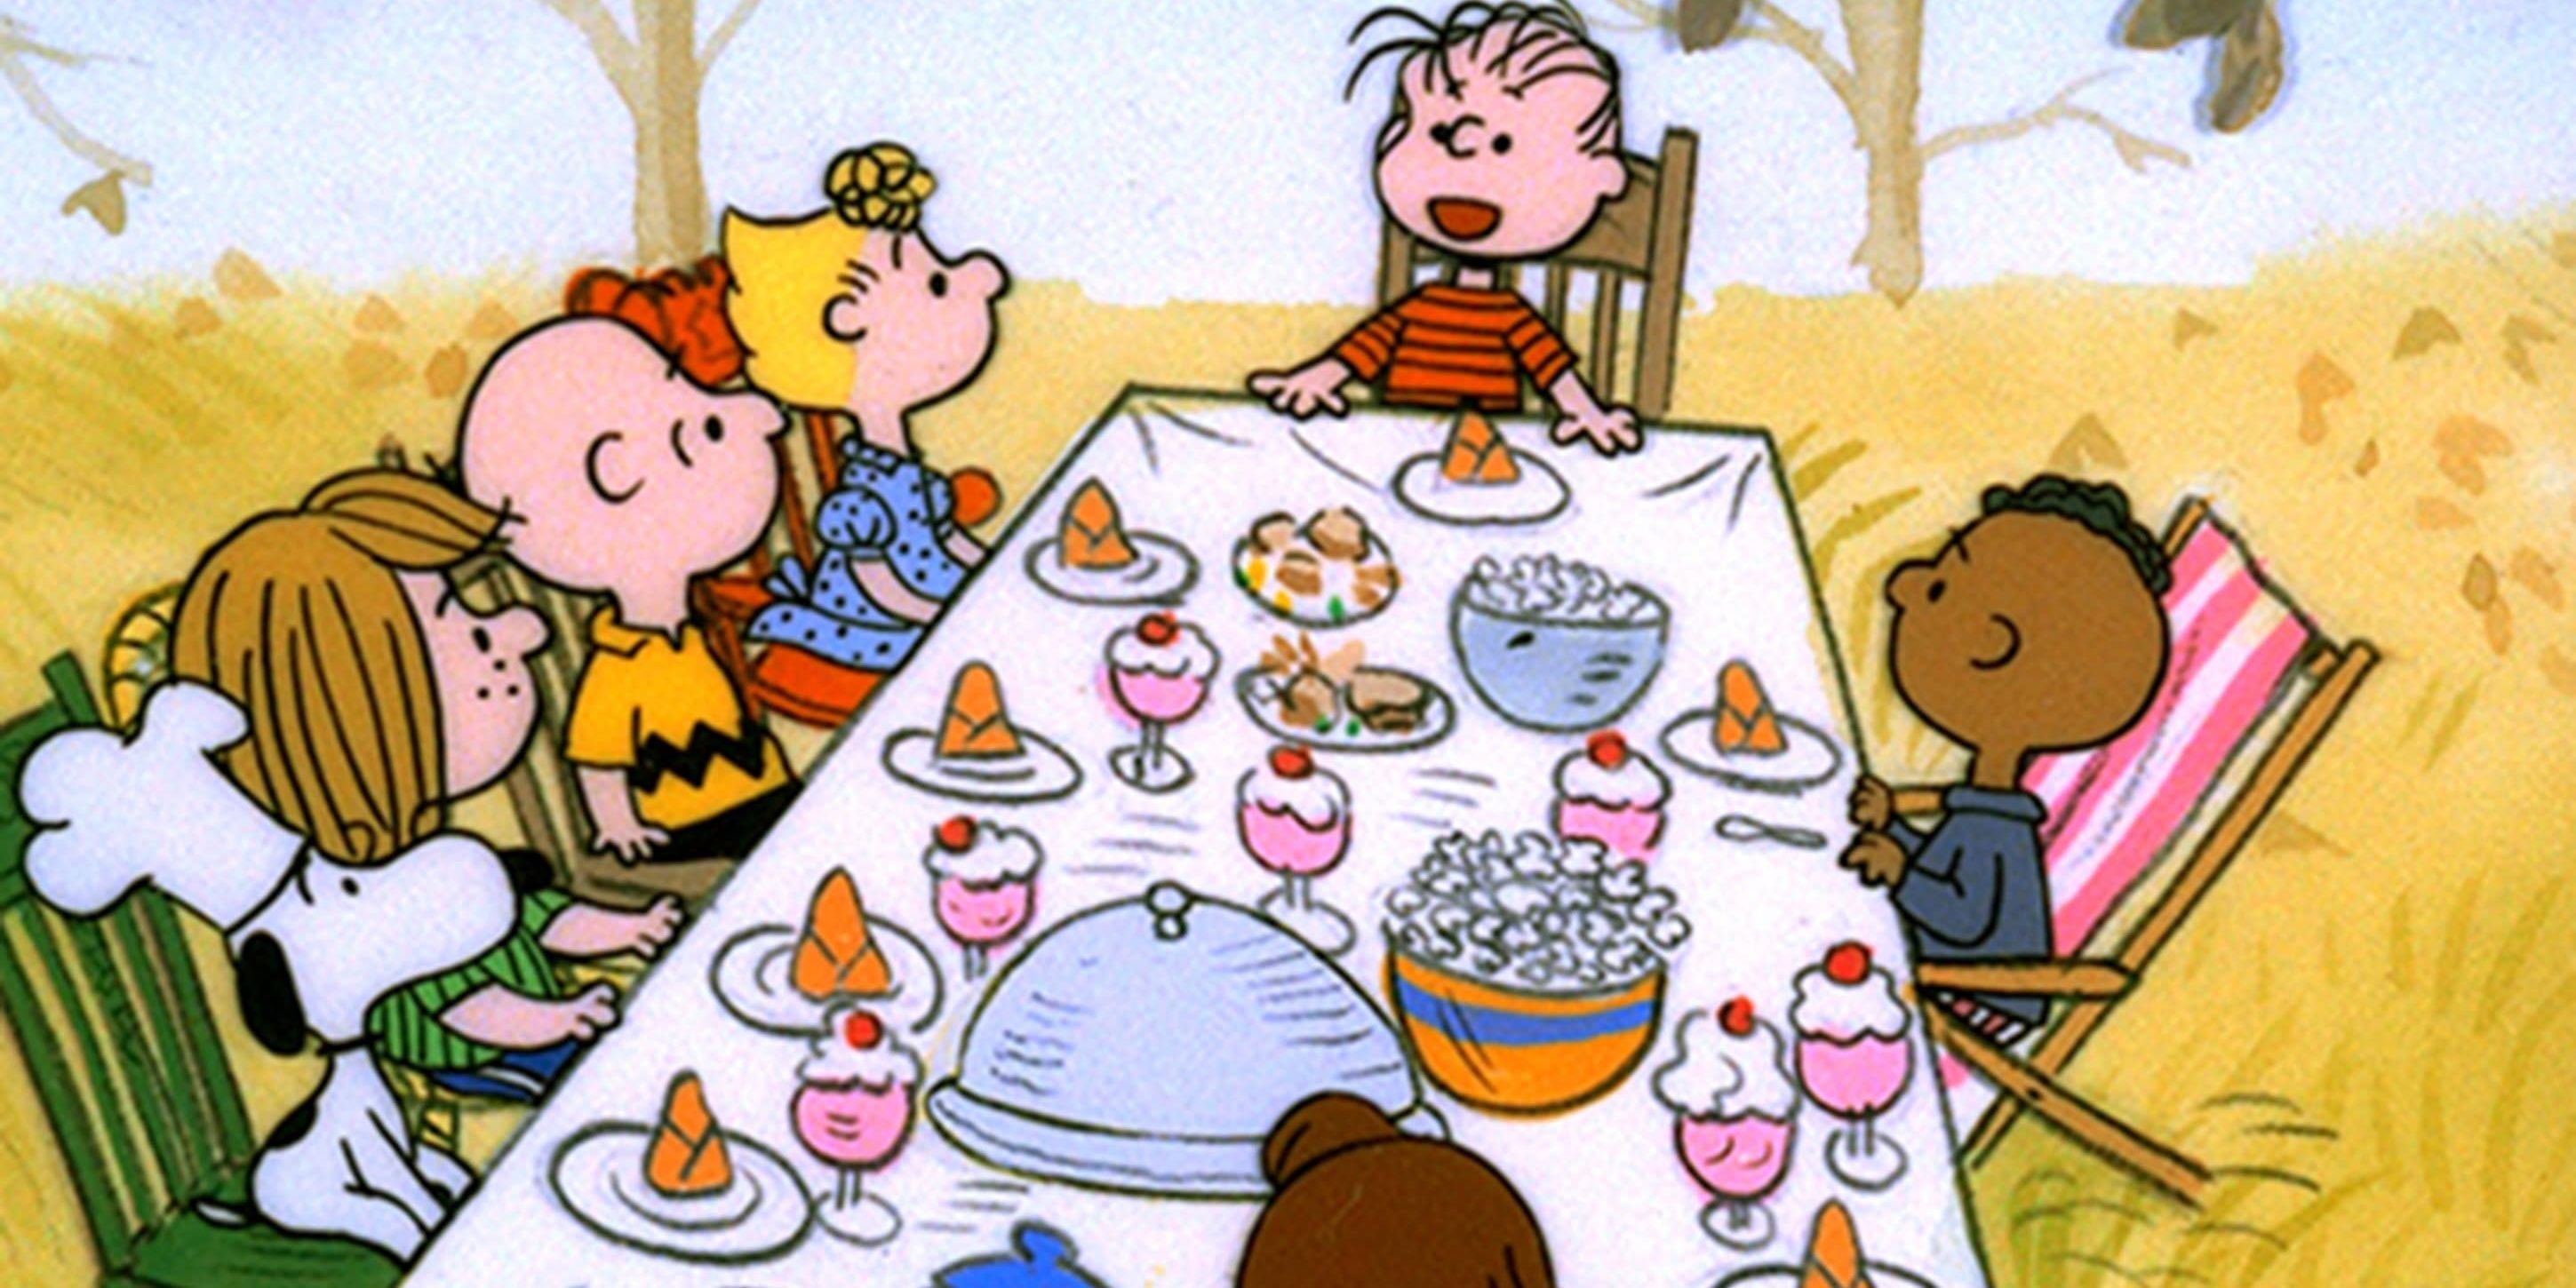 Charlie Brown Thanksgiving: Why Franklin's Portrayal Sparks Controversy